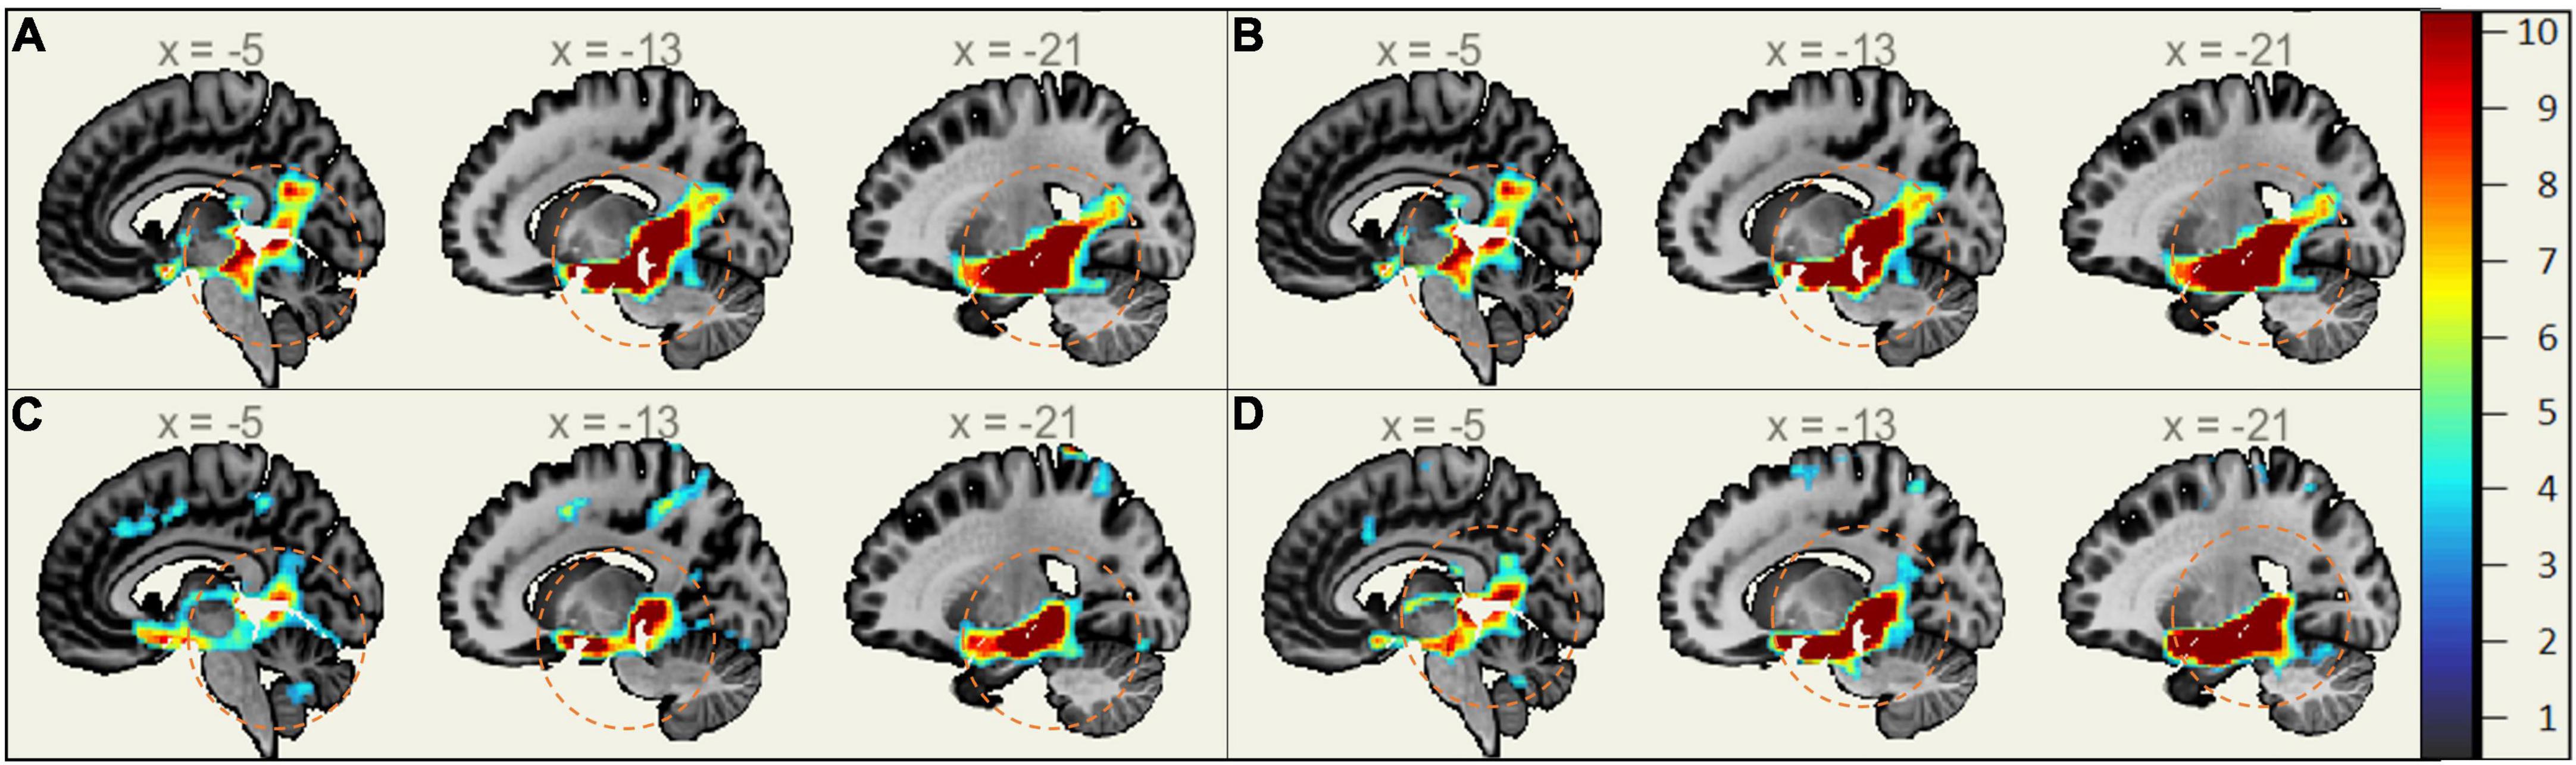 Frontiers Sex Differences In Brain Functional Connectivity Of Hippocampus In Mild Cognitive